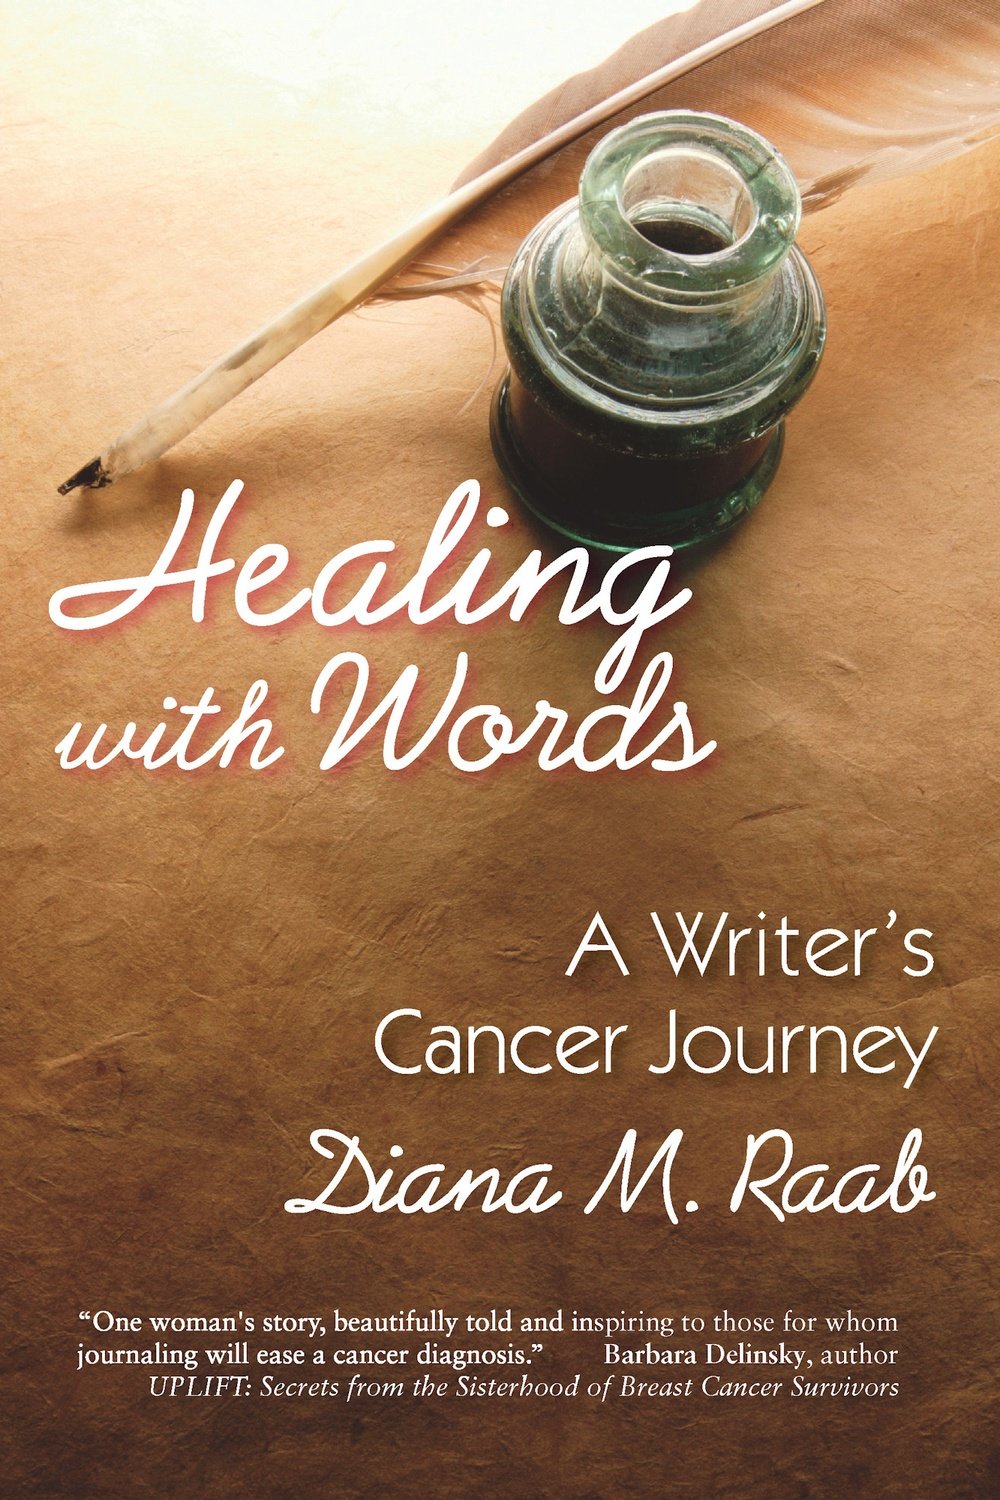 Healing With Words: A Writer's Cancer Journey